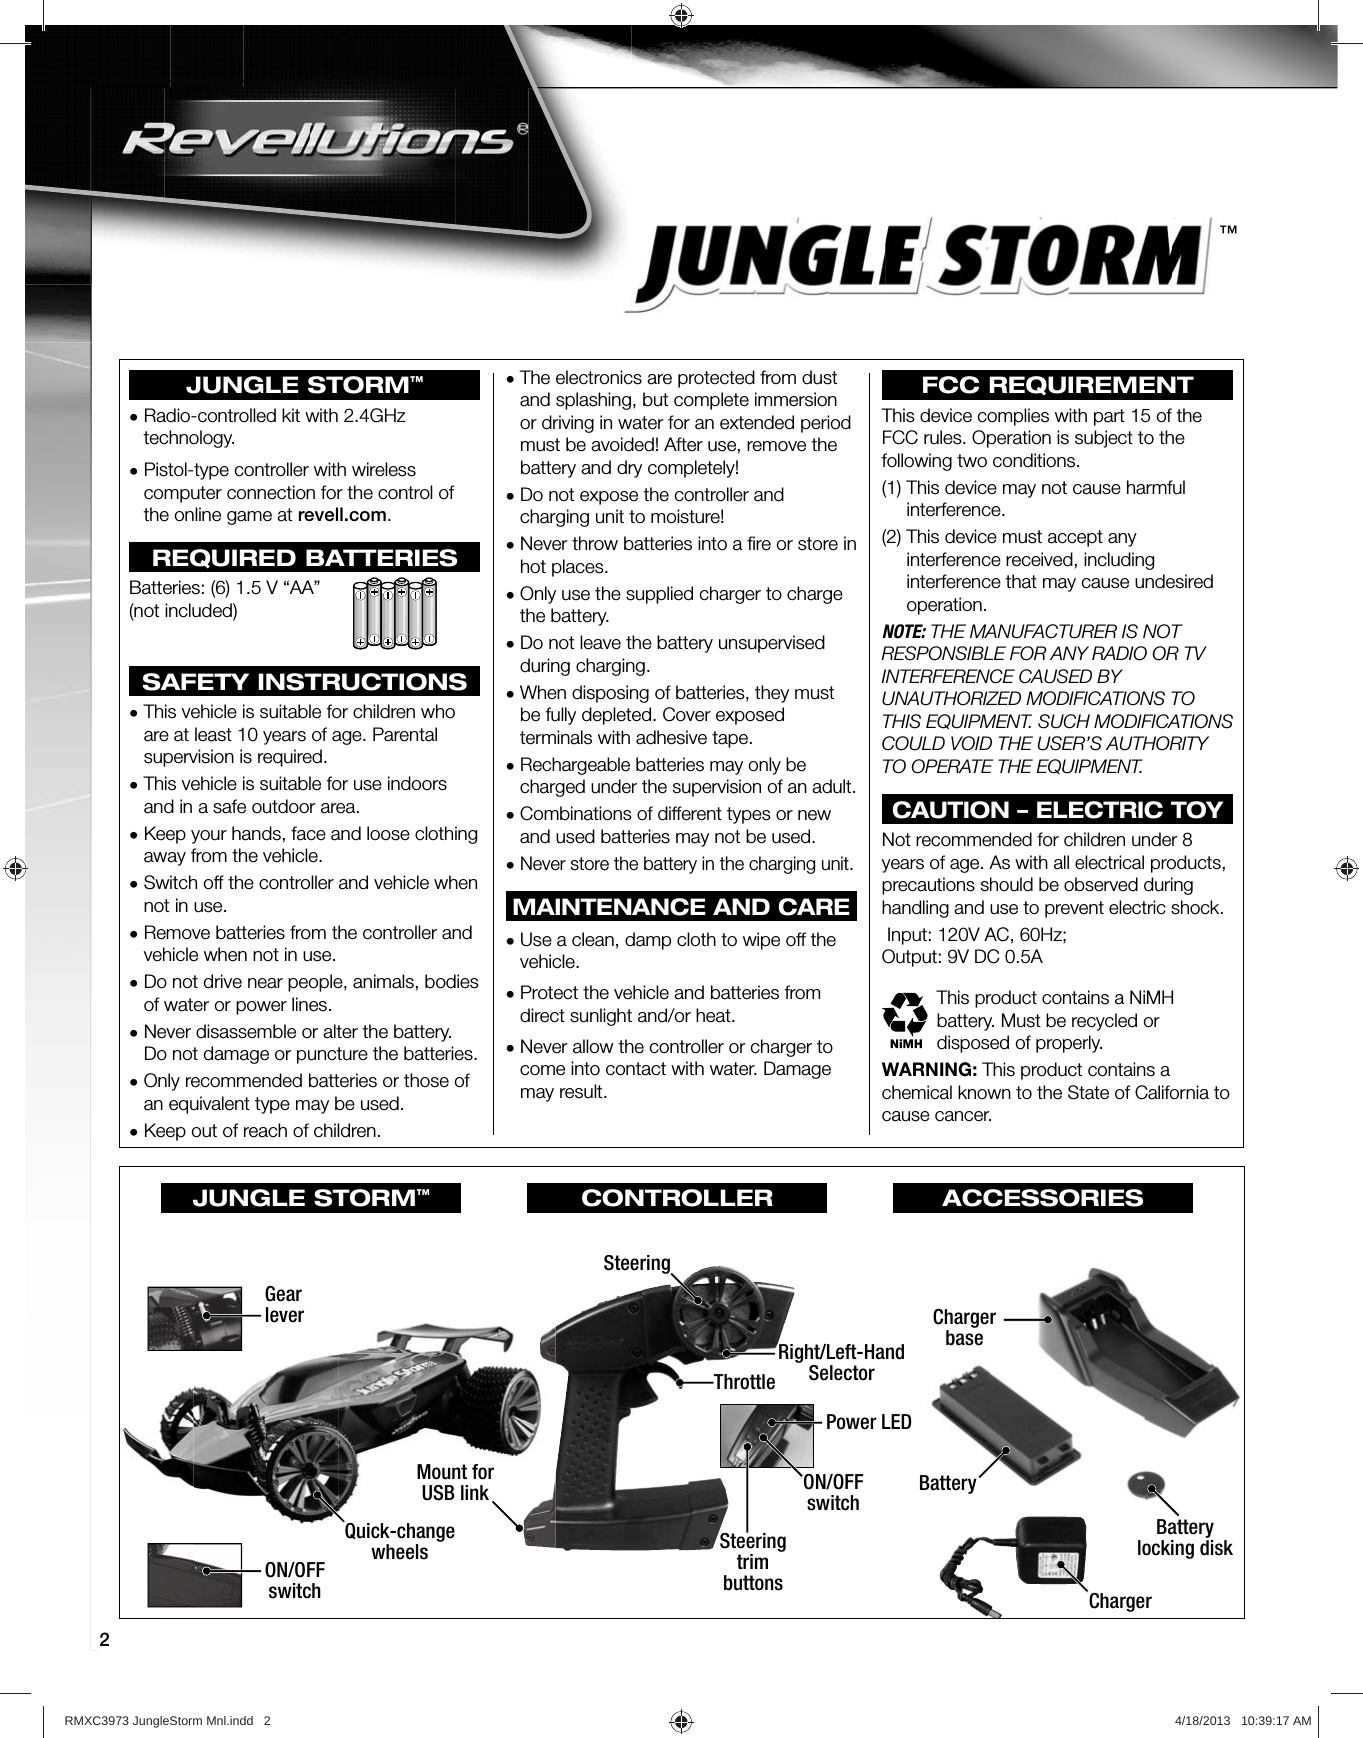 2™JUNGLE STORM™•  Radio-controlled kit with 2.4GHz technology.•  Pistol-type controller with wireless computer connection for the control of the online game at revell.com.REQUIRED BATTERIESBatteries: (6) 1.5 V “AA” (not included)SAFETY INSTRUCTIONS•  This vehicle is suitable for children who are at least 10 years of age. Parental supervision is required.•  This vehicle is suitable for use indoors and in a safe outdoor area.•  Keep your hands, face and loose clothing away from the vehicle.•  Switch off the controller and vehicle when not in use.•  Remove batteries from the controller and vehicle when not in use.•  Do not drive near people, animals, bodies of water or power lines.•  Never disassemble or alter the battery. Do not damage or puncture the batteries.•  Only recommended batteries or those of an equivalent type may be used.•  Keep out of reach of children.•  The electronics are protected from dust and splashing, but complete immersion or driving in water for an extended period must be avoided! After use, remove the battery and dry completely!•  Do not expose the controller and charging unit to moisture!•  Never throw batteries into a ﬁ re or store in hot places.•  Only use the supplied charger to charge the battery.•  Do not leave the battery unsupervised during charging.•  When disposing of batteries, they must be fully depleted. Cover exposed terminals with adhesive tape.•  Rechargeable batteries may only be charged under the supervision of an adult.•  Combinations of different types or new and used batteries may not be used.•  Never store the battery in the charging unit.MAINTENANCE AND CARE•  Use a clean, damp cloth to wipe off the vehicle.•  Protect the vehicle and batteries from direct sunlight and/or heat.•  Never allow the controller or charger to come into contact with water. Damage may result.FCC REQUIREMENTThis device complies with part 15 of the FCC rules. Operation is subject to the following two conditions.(1)  This device may not cause harmful interference.(2)  This device must accept any interference received, including interference that may cause undesired operation.NOTE: THE MANUFACTURER IS NOT RESPONSIBLE FOR ANY RADIO OR TV INTERFERENCE CAUSED BY UNAUTHORIZED MODIFICATIONS TO THIS EQUIPMENT. SUCH MODIFICATIONS COULD VOID THE USER’S AUTHORITY TO OPERATE THE EQUIPMENT.CAUTION – ELECTRIC TOYNot recommended for children under 8 years of age. As with all electrical products, precautions should be observed during handling and use to prevent electric shock. Input: 120V AC, 60Hz;Output: 9V DC 0.5AThis product contains a NiMH battery. Must be recycled or disposed of properly.WARNING: This product contains a chemical known to the State of California to cause cancer.ON/OFFswitchGearleverBatteryBatterylocking diskChargerbaseMount forUSB linkSteeringRight/Left-HandSelectorThrottlePower LEDSteeringtrimbuttonsON/OFFswitchON/OFFswitchGearleverMount forUSB linkQuick-changewheelsChargerJUNGLE STORM™CONTROLLER ACCESSORIESRMXC3973 JungleStorm Mnl.indd   2 4/18/2013   10:39:17 AM